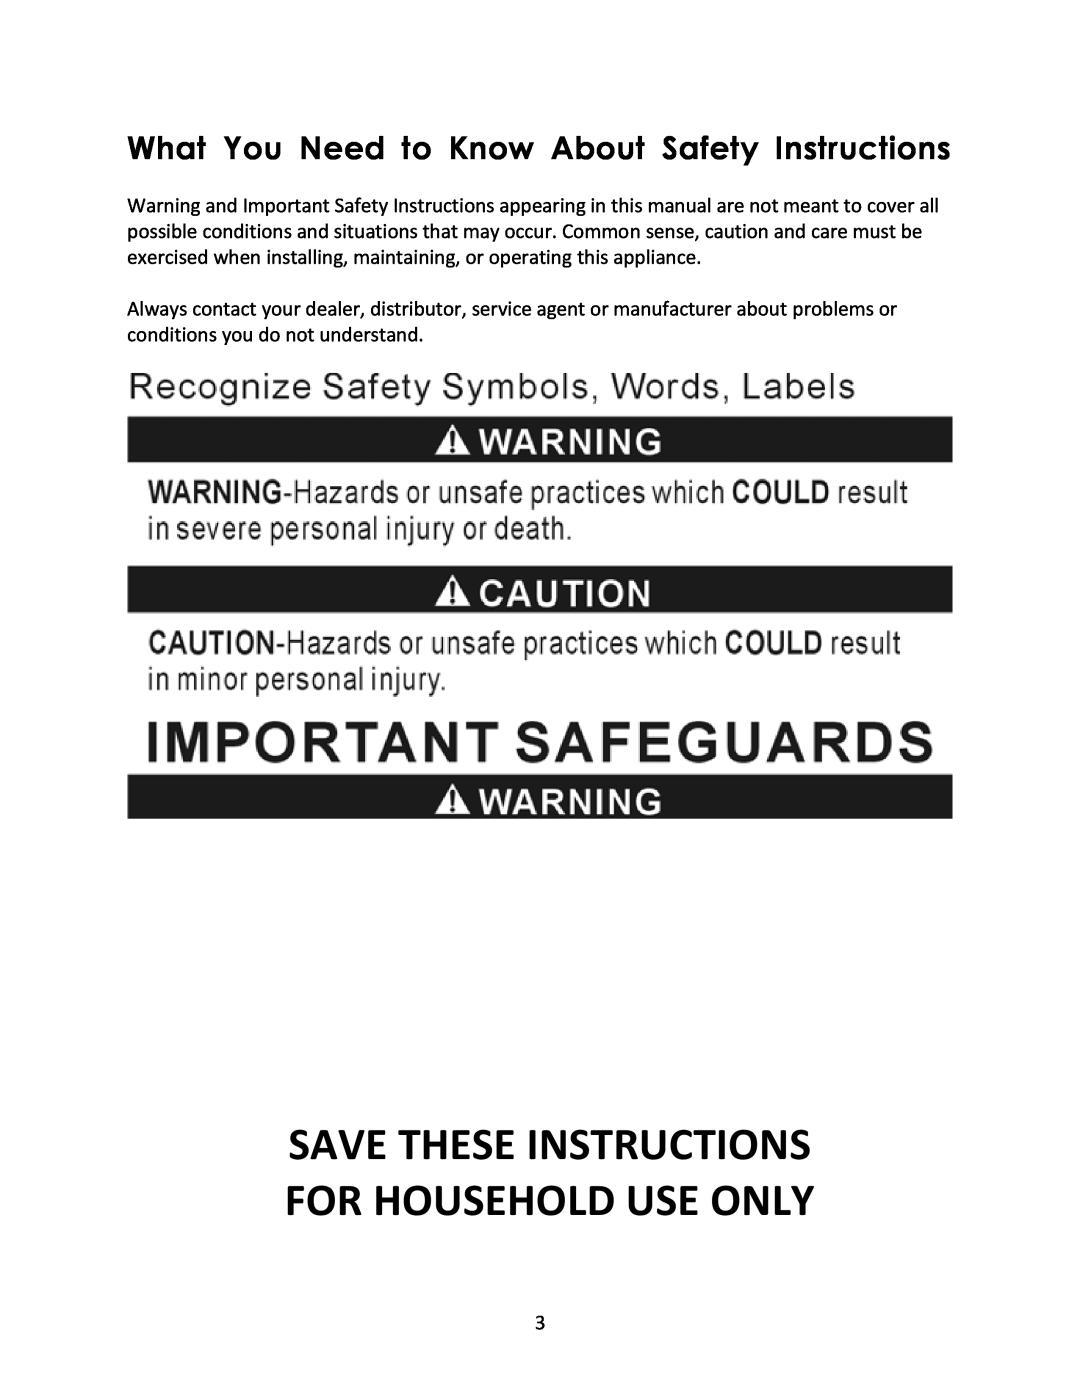 Magic Chef MCSG19B1 What You Need to Know About Safety Instructions, Save These Instructions For Household Use Only 